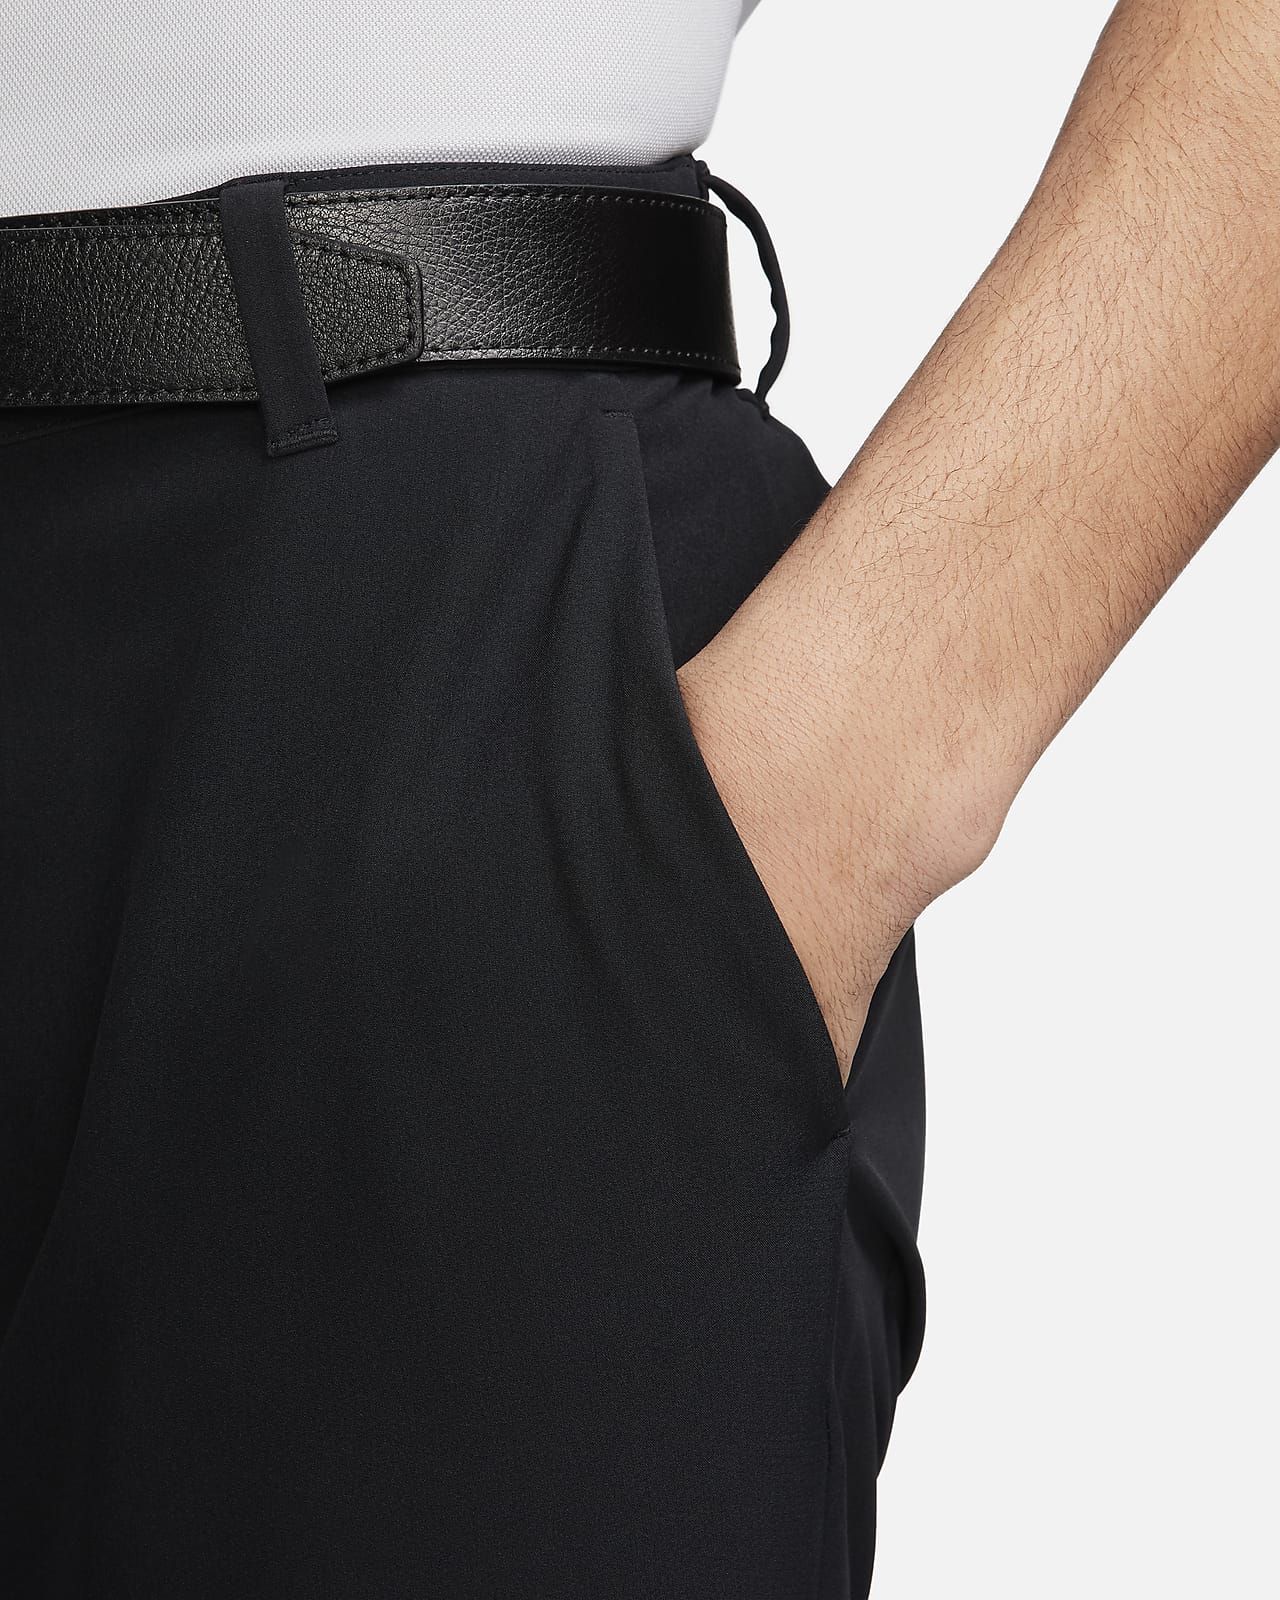 Nike Golf Pants, Shop The Largest Collection